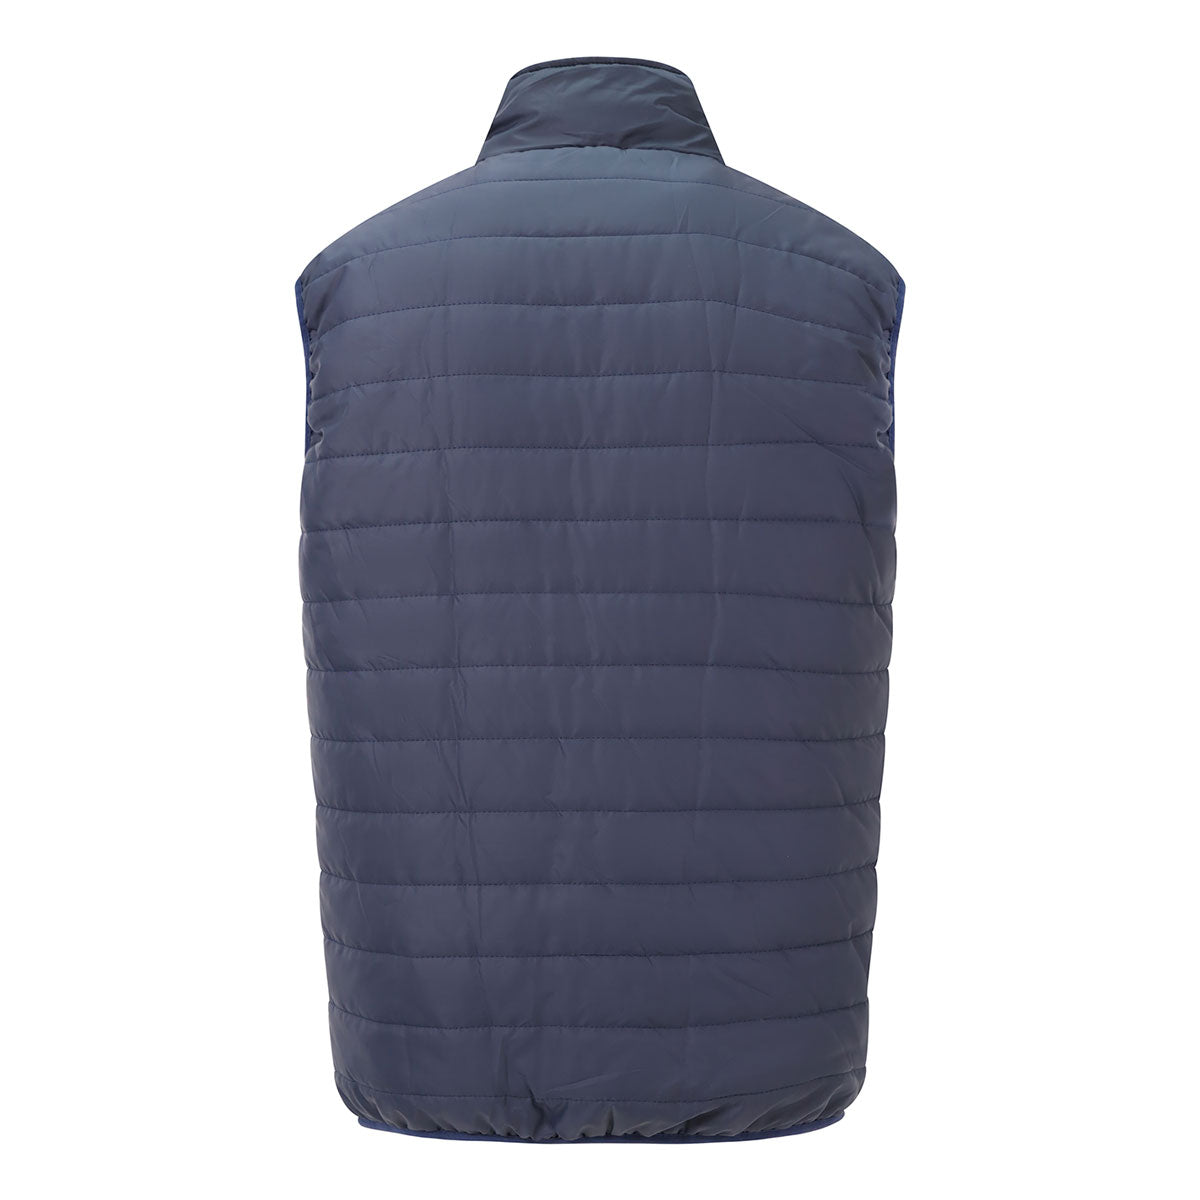 Mc Keever St Fechins GAA Core 22 Padded Gilet - Adult - Navy